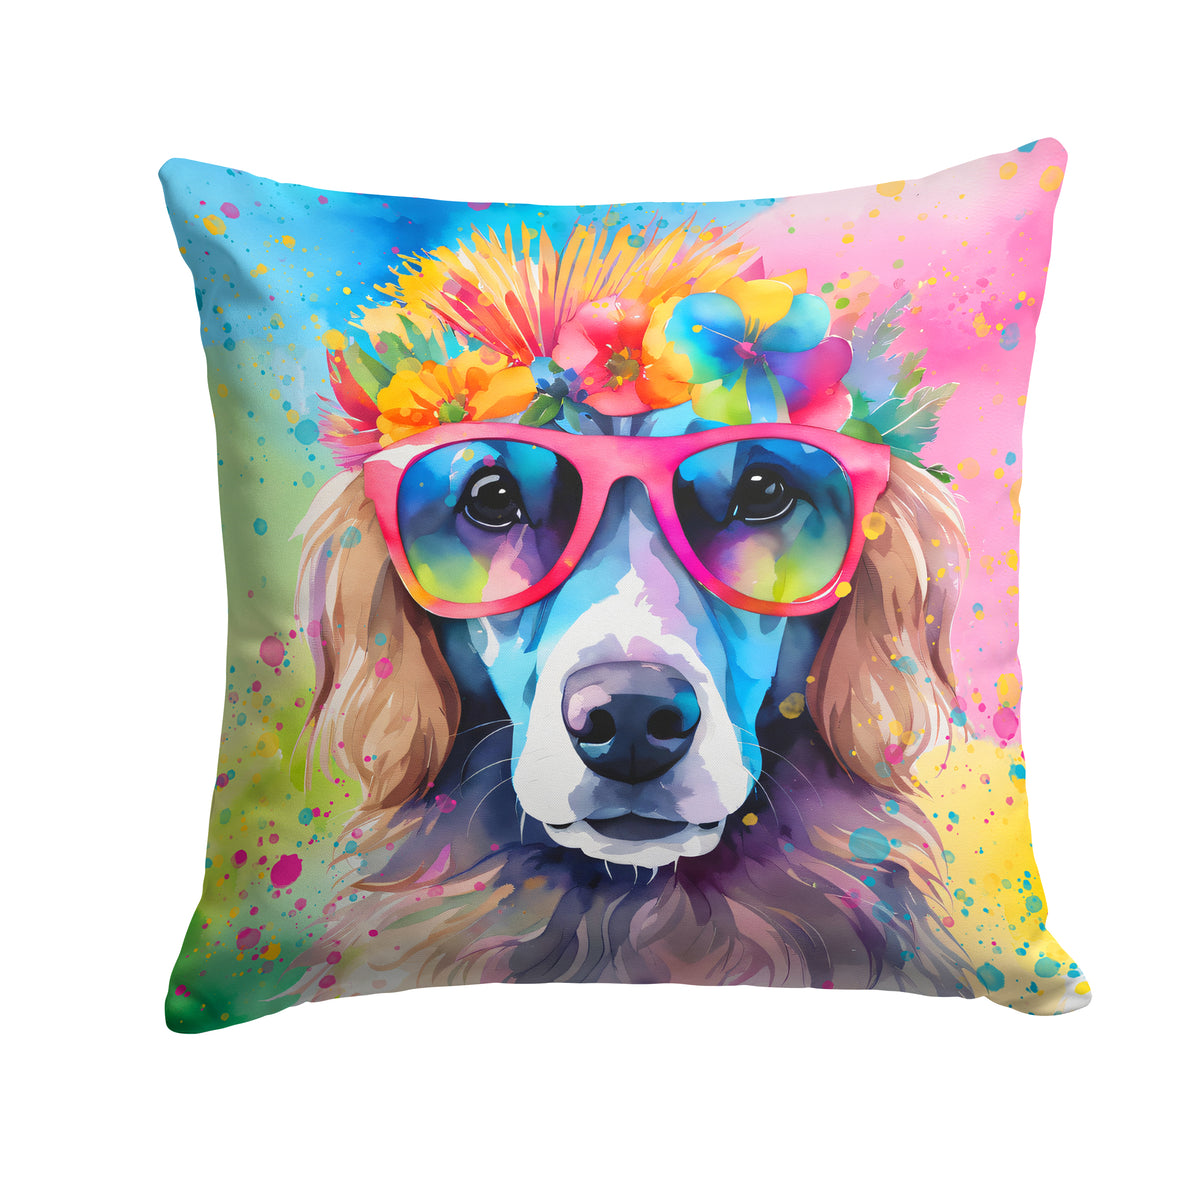 Buy this Poodle Hippie Dawg Fabric Decorative Pillow